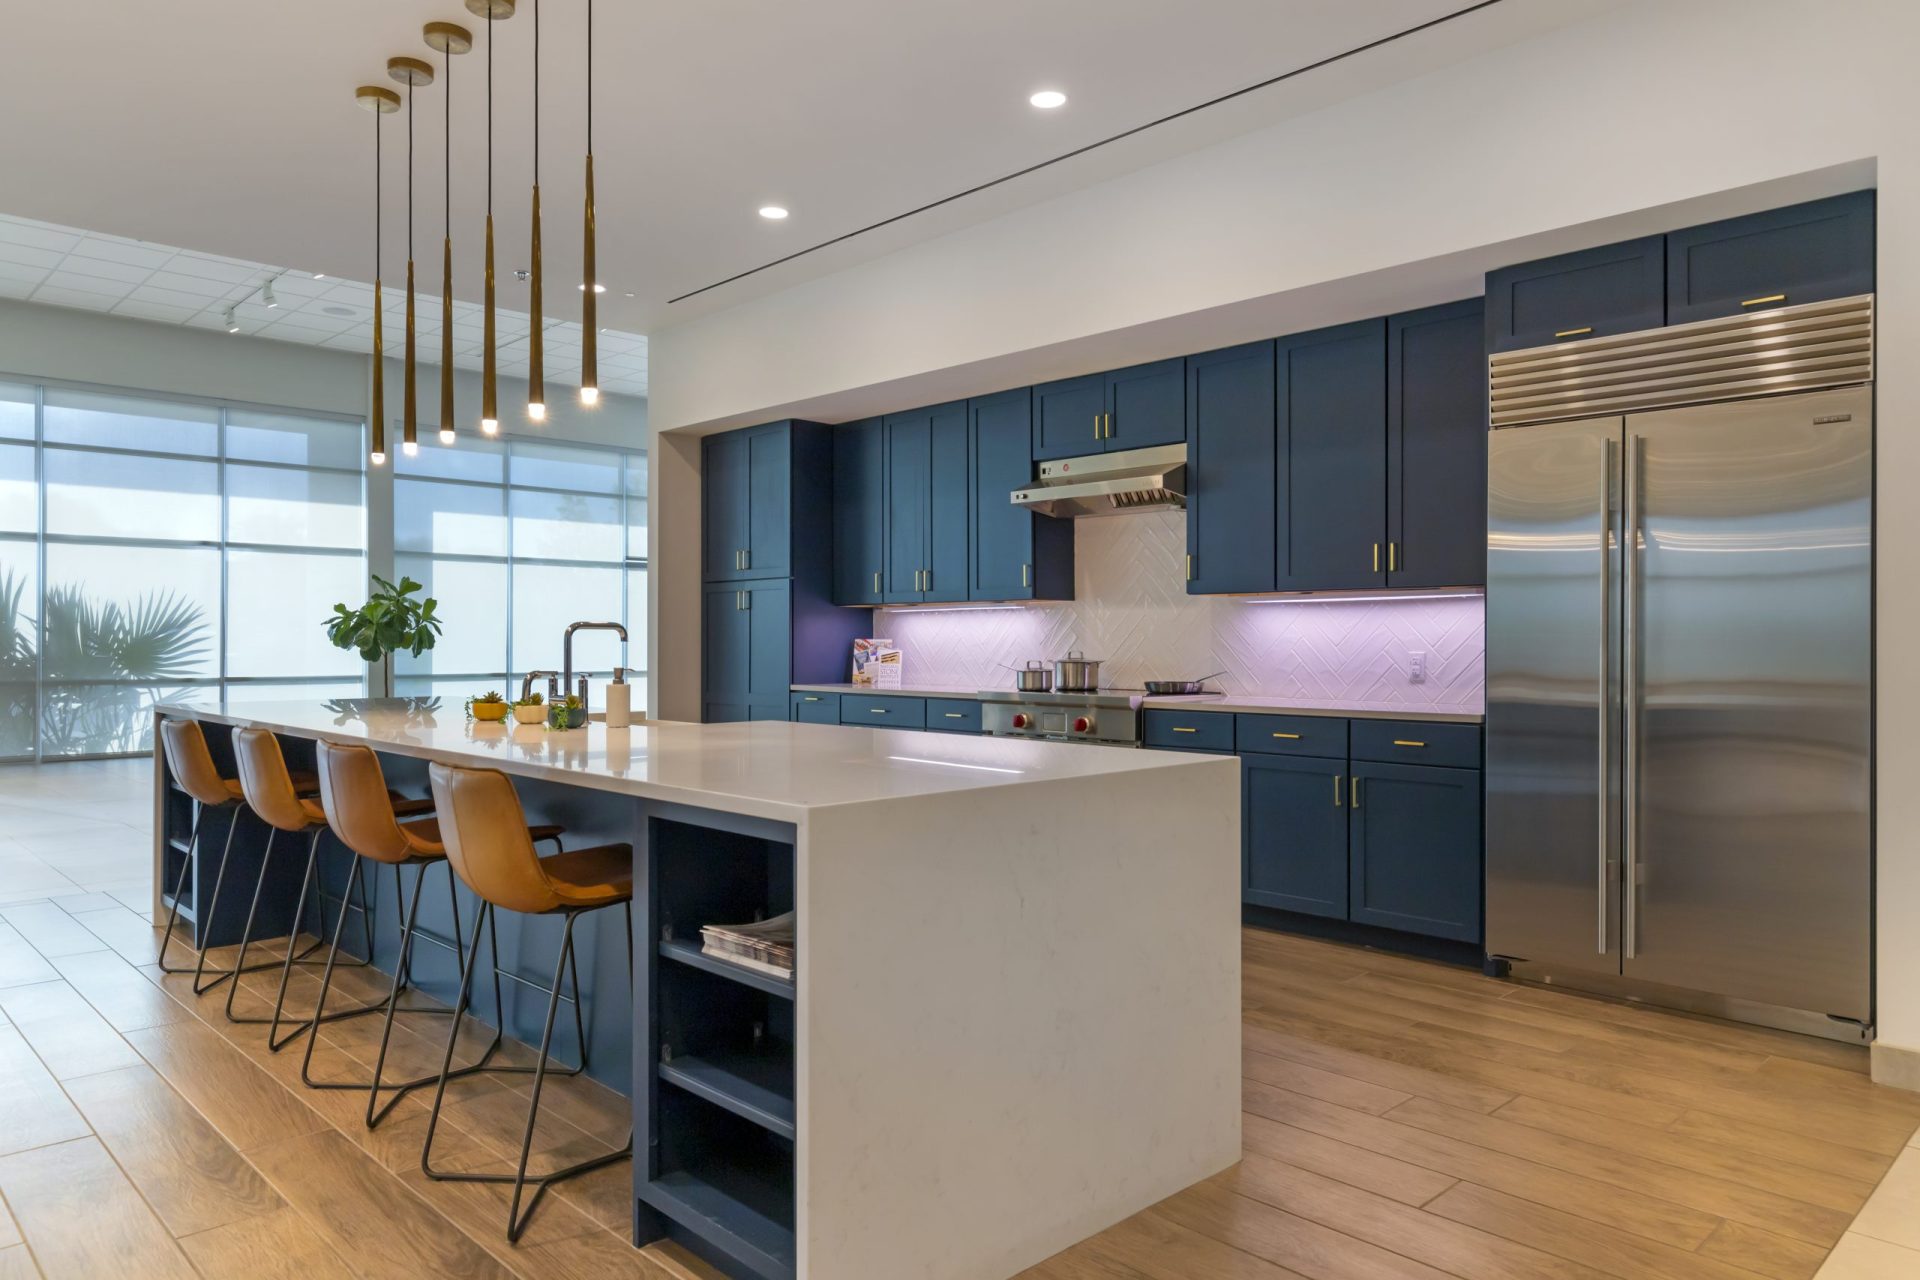 Austin showroom image with blue cabinets and island